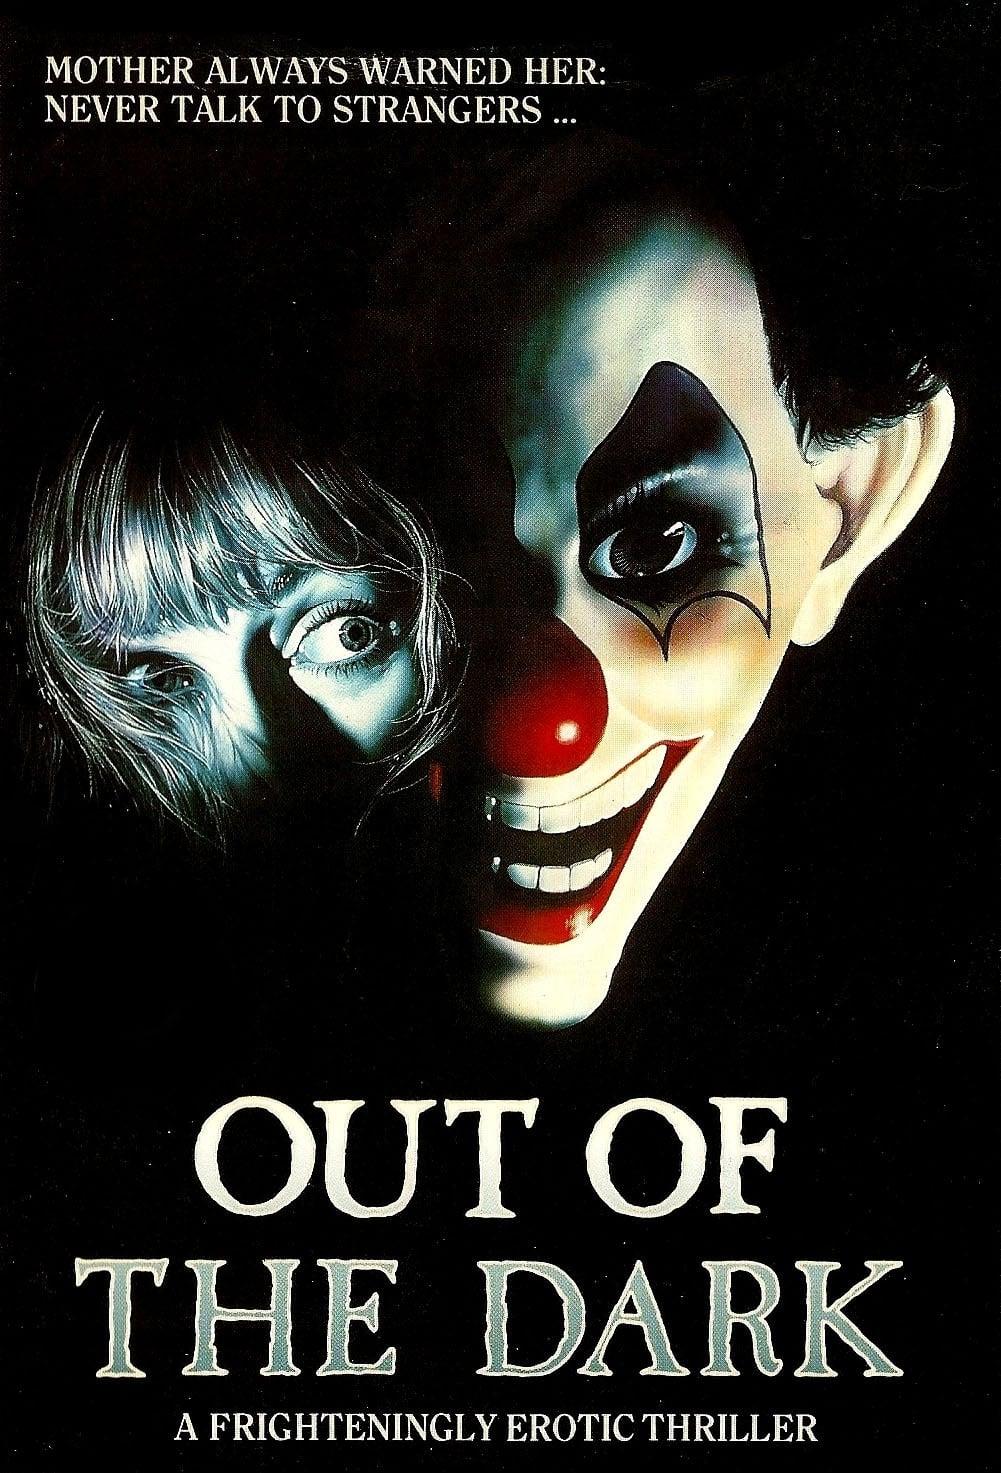 Out of the Dark poster